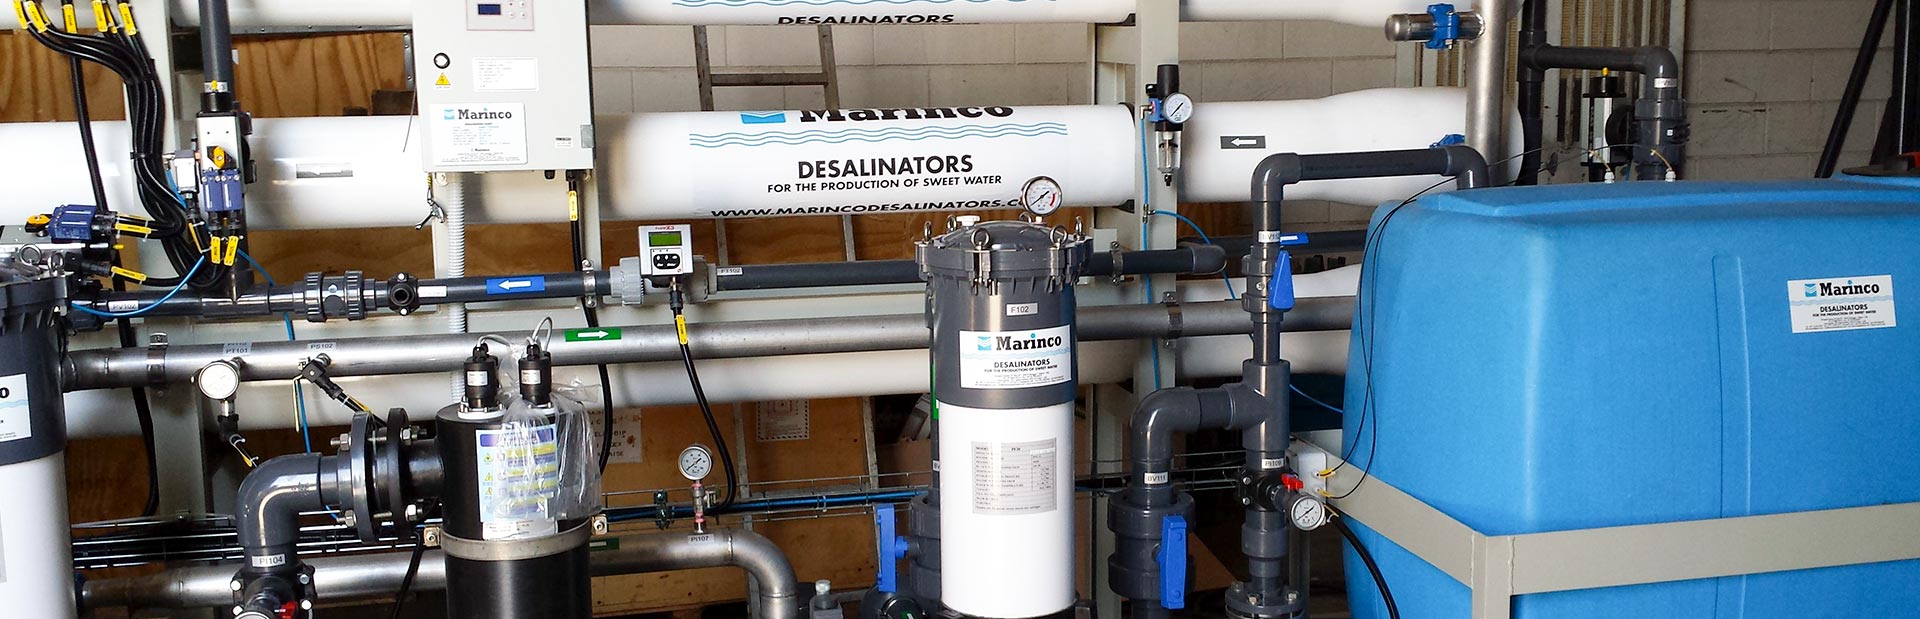 chemical products for desalination plants